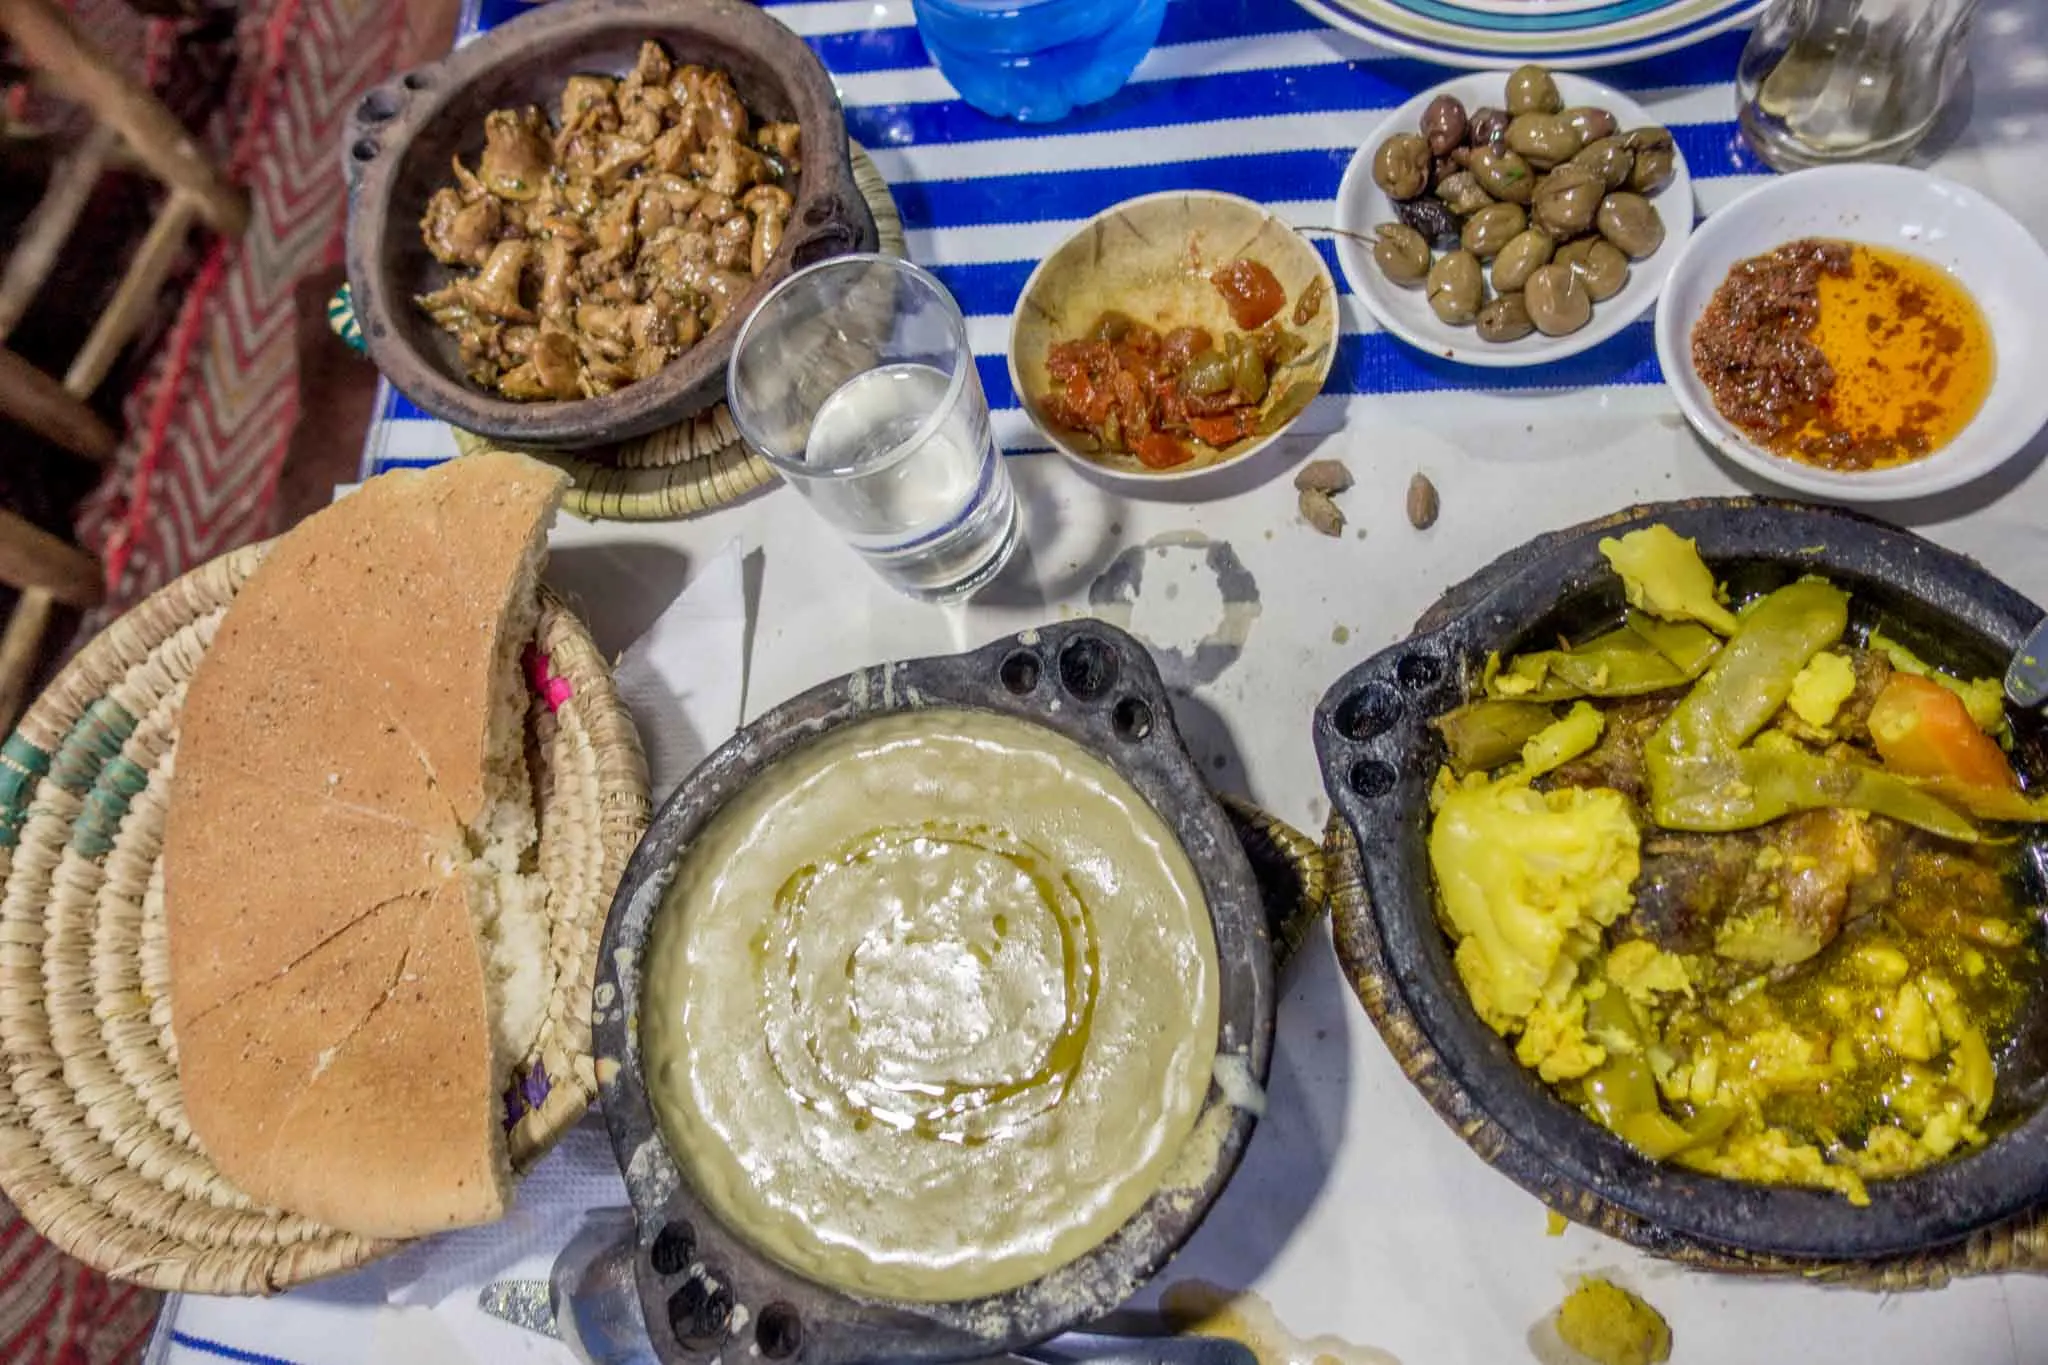 Traditional Moroccan food on table.